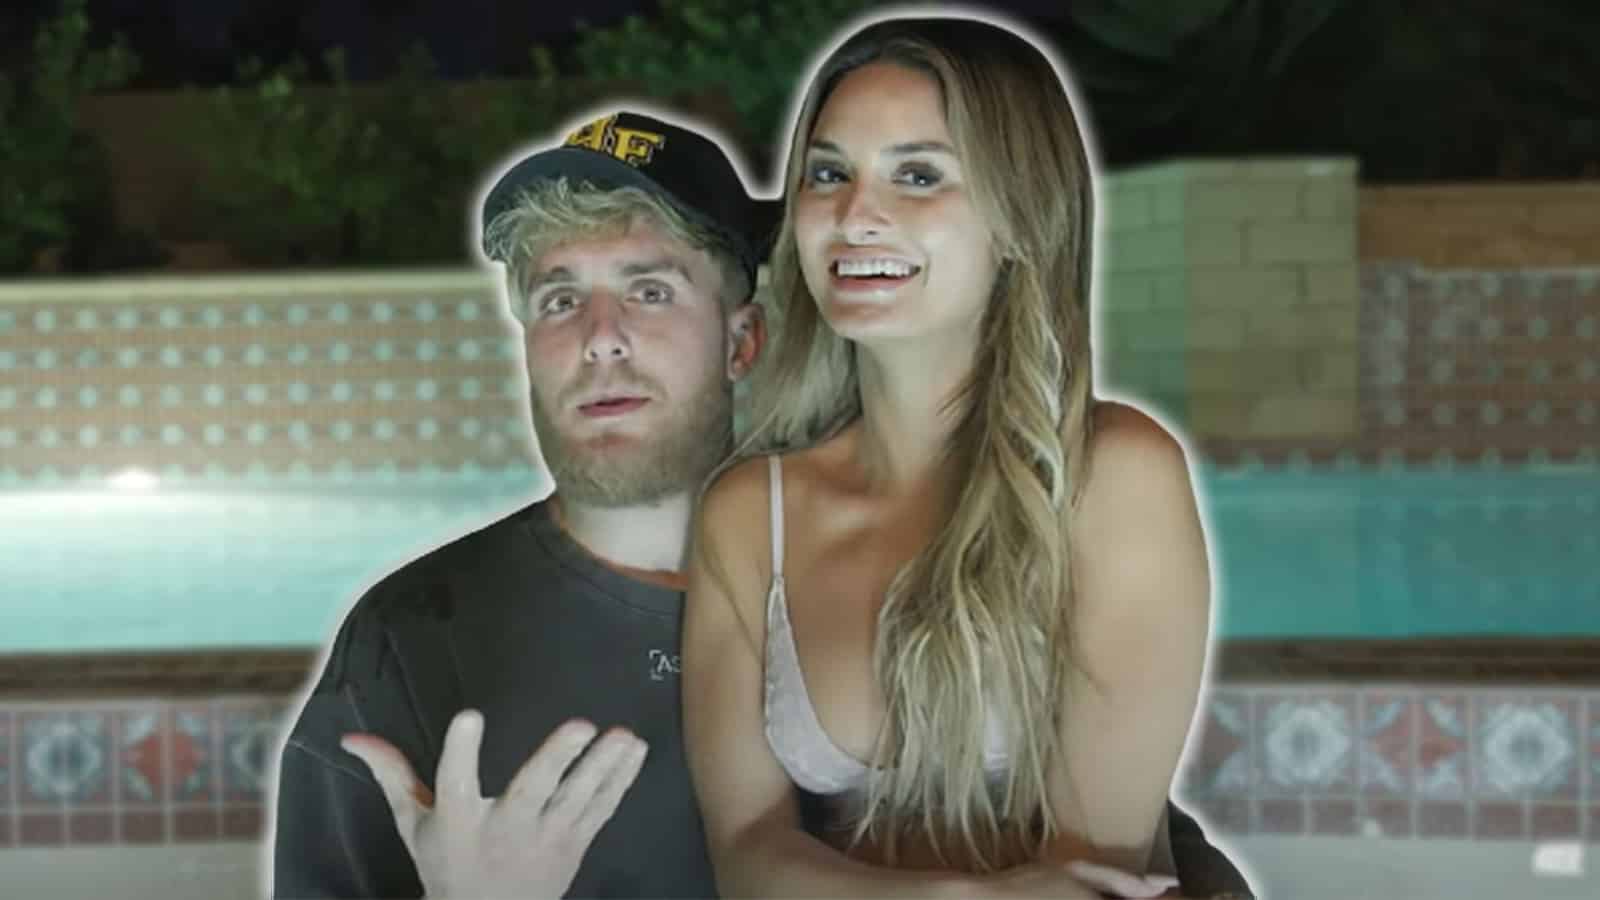 Jake Paul responds to marriage speculation Julia